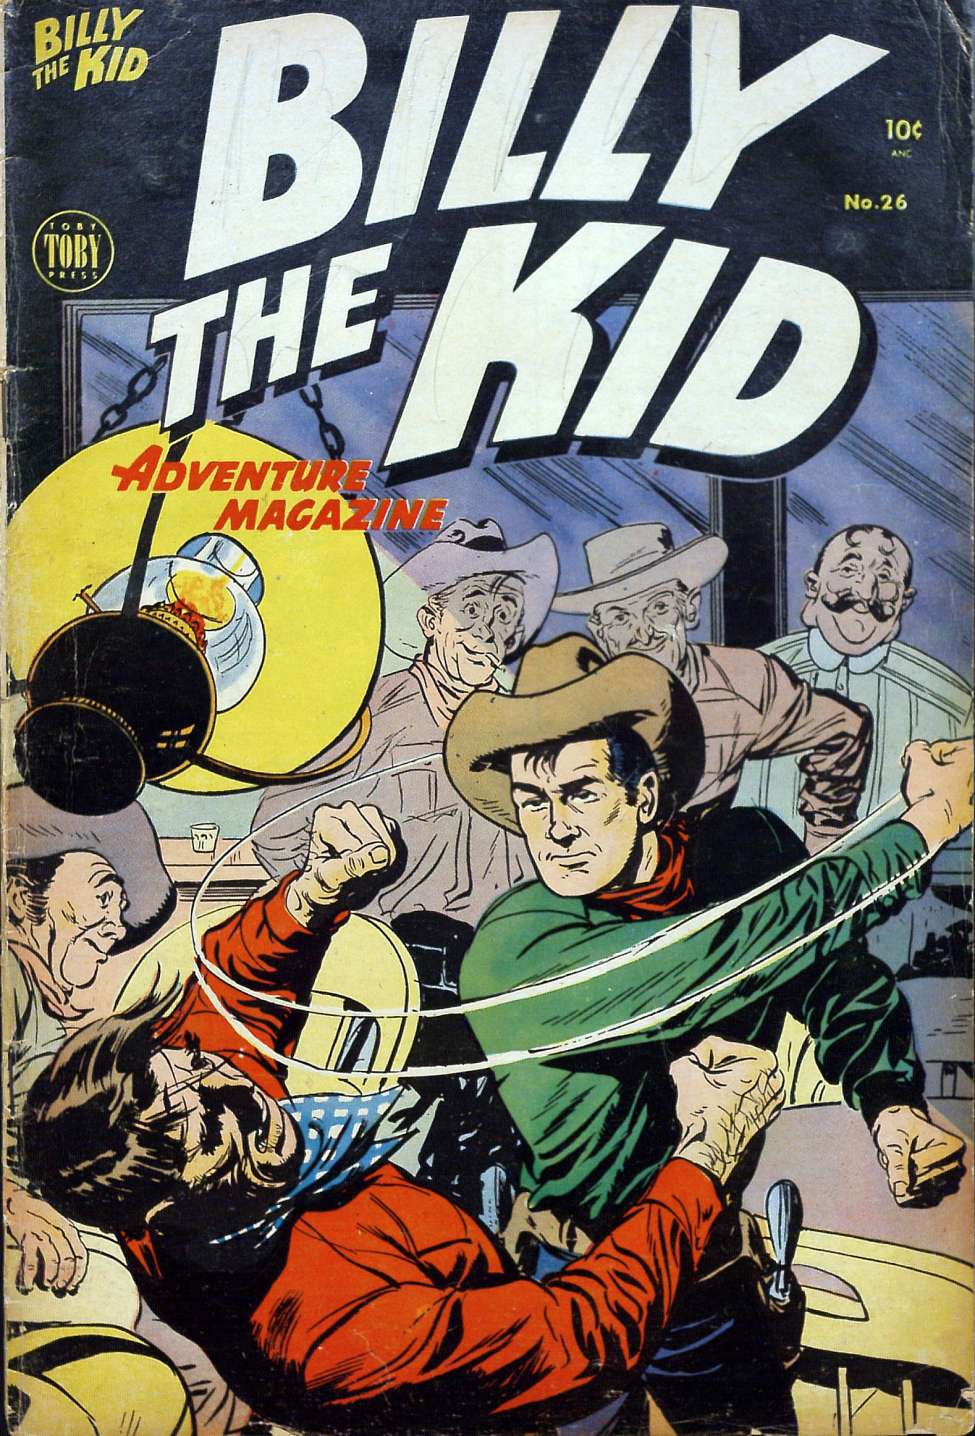 Comic Book Cover For Billy the Kid Adventure Magazine 26 - Version 1